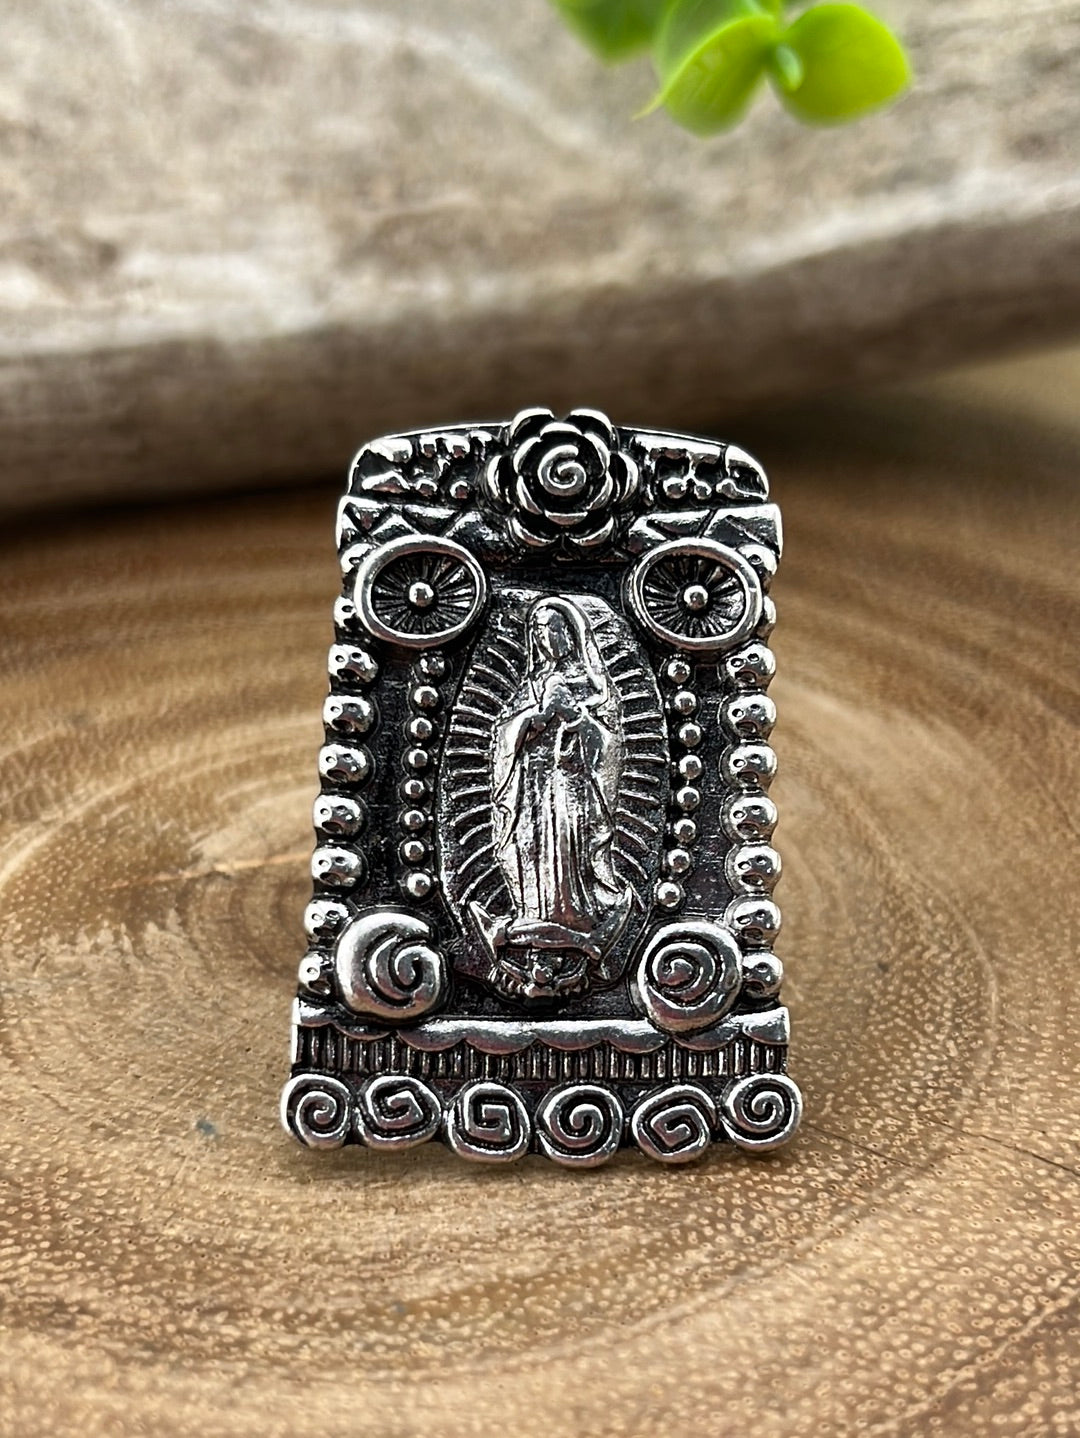 Our Lady Fashion Ring